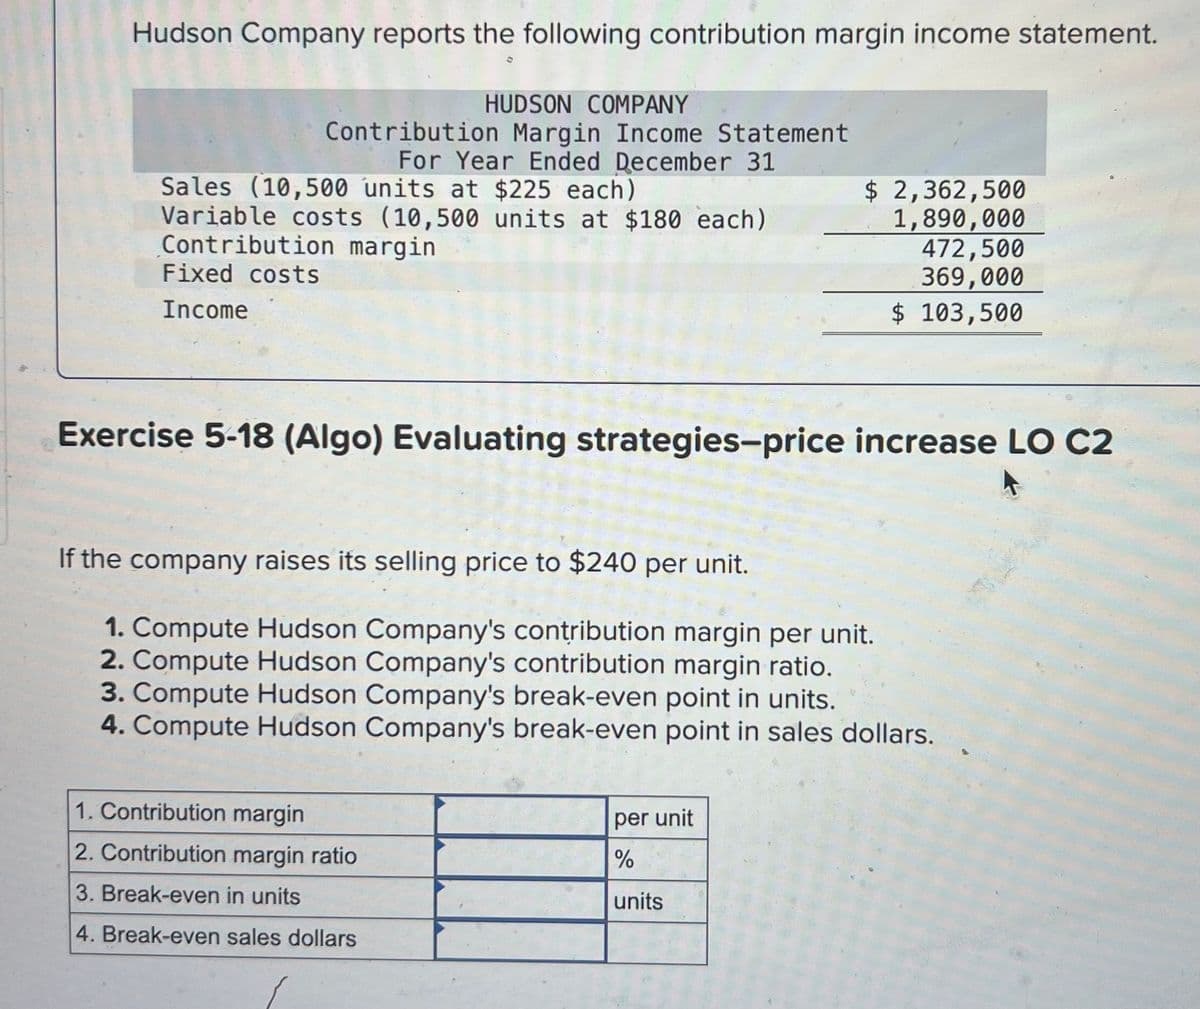 Hudson Company reports the following contribution margin income statement.
HUDSON COMPANY
Contribution Margin Income Statement
For Year Ended December 31
Sales (10,500 units at $225 each)
Variable costs (10,500 units at $180 each)
Contribution margin
Fixed costs
Income
$ 2,362,500
1,890,000
472,500
369,000
$ 103,500
Exercise 5-18 (Algo) Evaluating strategies-price increase LO C2
If the company raises its selling price to $240 per unit.
1. Compute Hudson Company's contribution margin per unit.
2. Compute Hudson Company's contribution margin ratio.
3. Compute Hudson Company's break-even point in units.
4. Compute Hudson Company's break-even point in sales dollars.
1. Contribution margin
2. Contribution margin ratio
3. Break-even in units
4. Break-even sales dollars
per unit
%
units